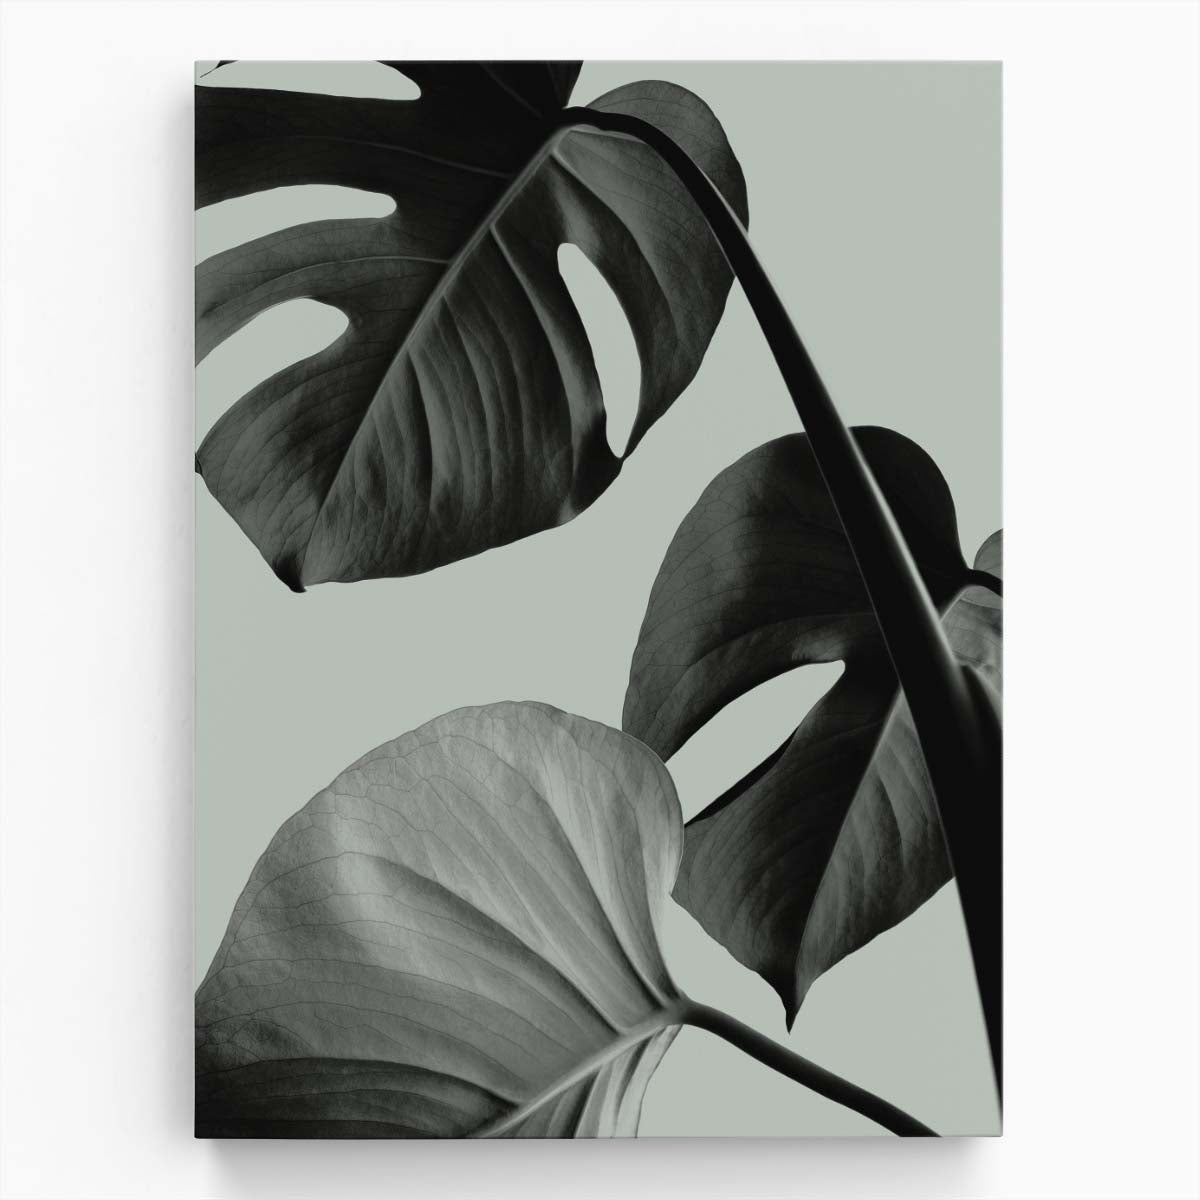 1XStudio Monstera Leaves Botanical Photography in Teal with Plain Background by Luxuriance Designs, made in USA